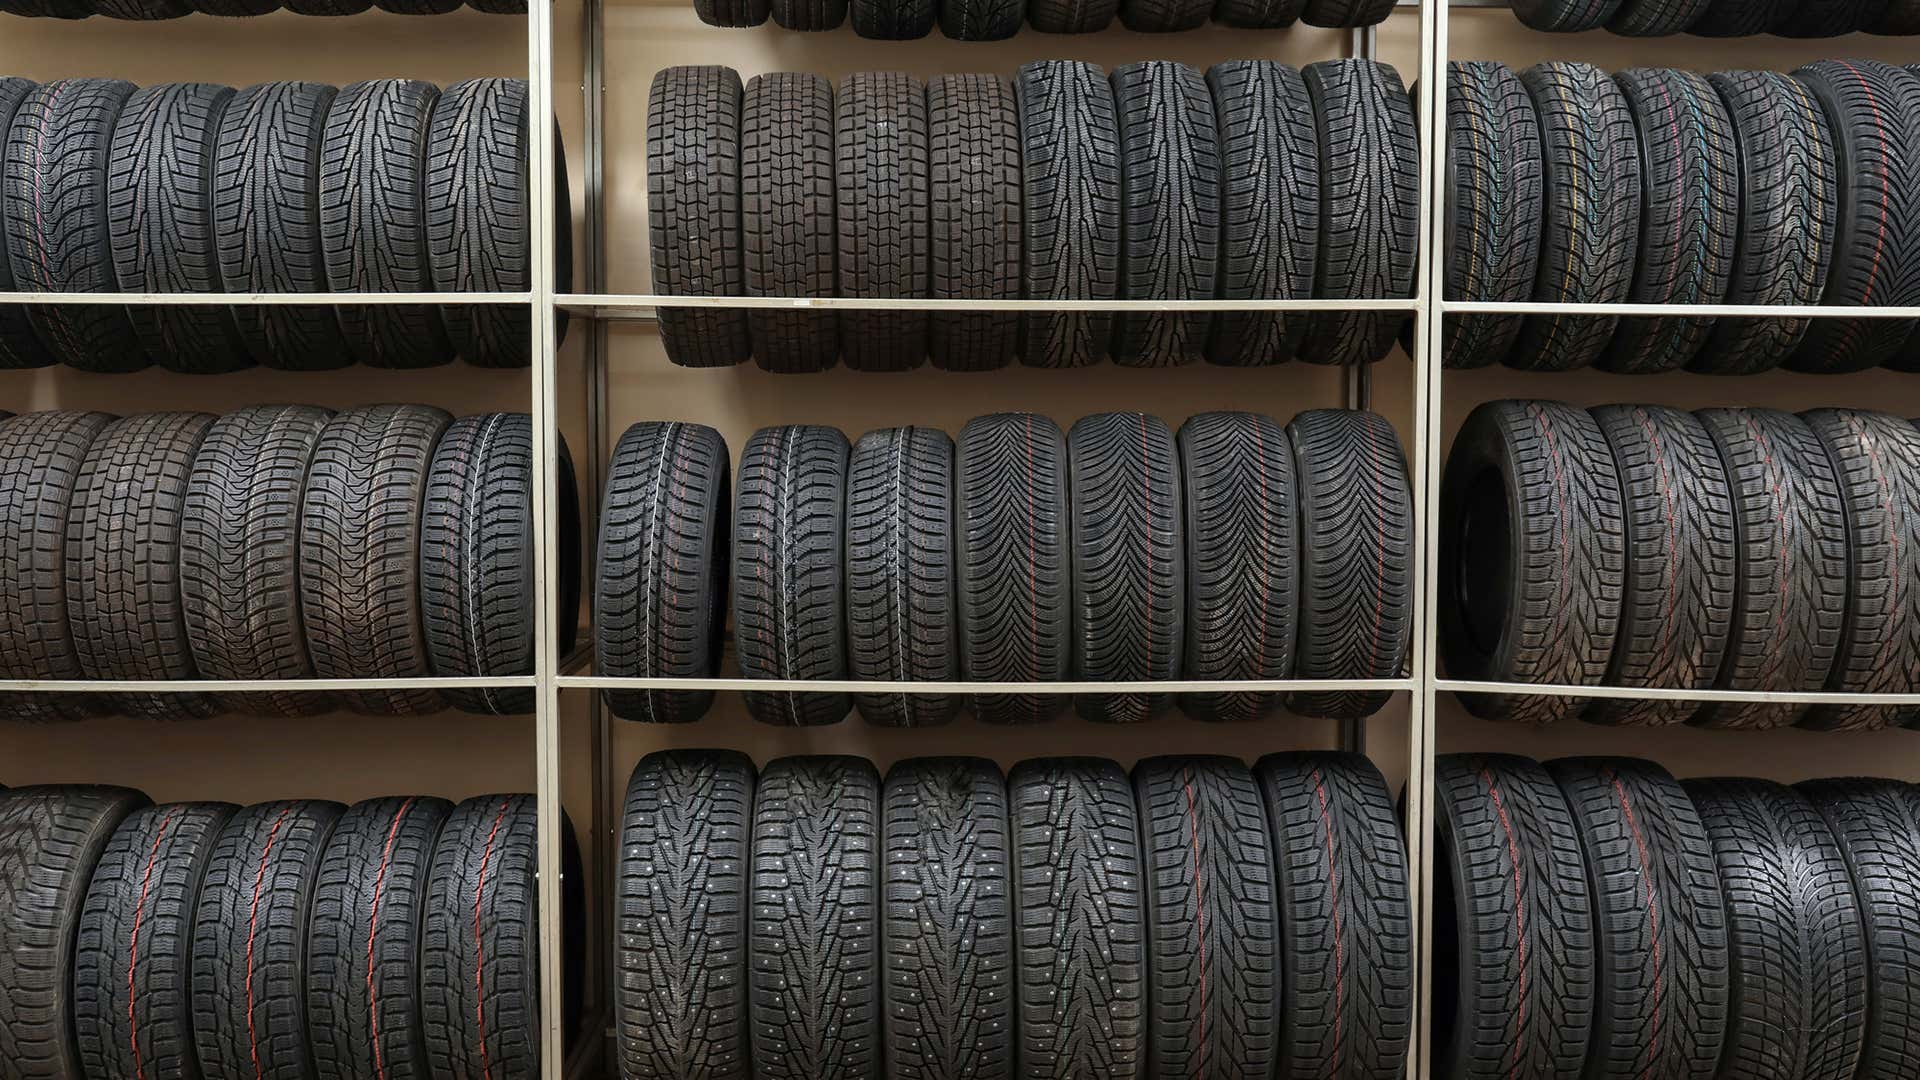 Tires come in a variety of shapes, sizes, and designs.